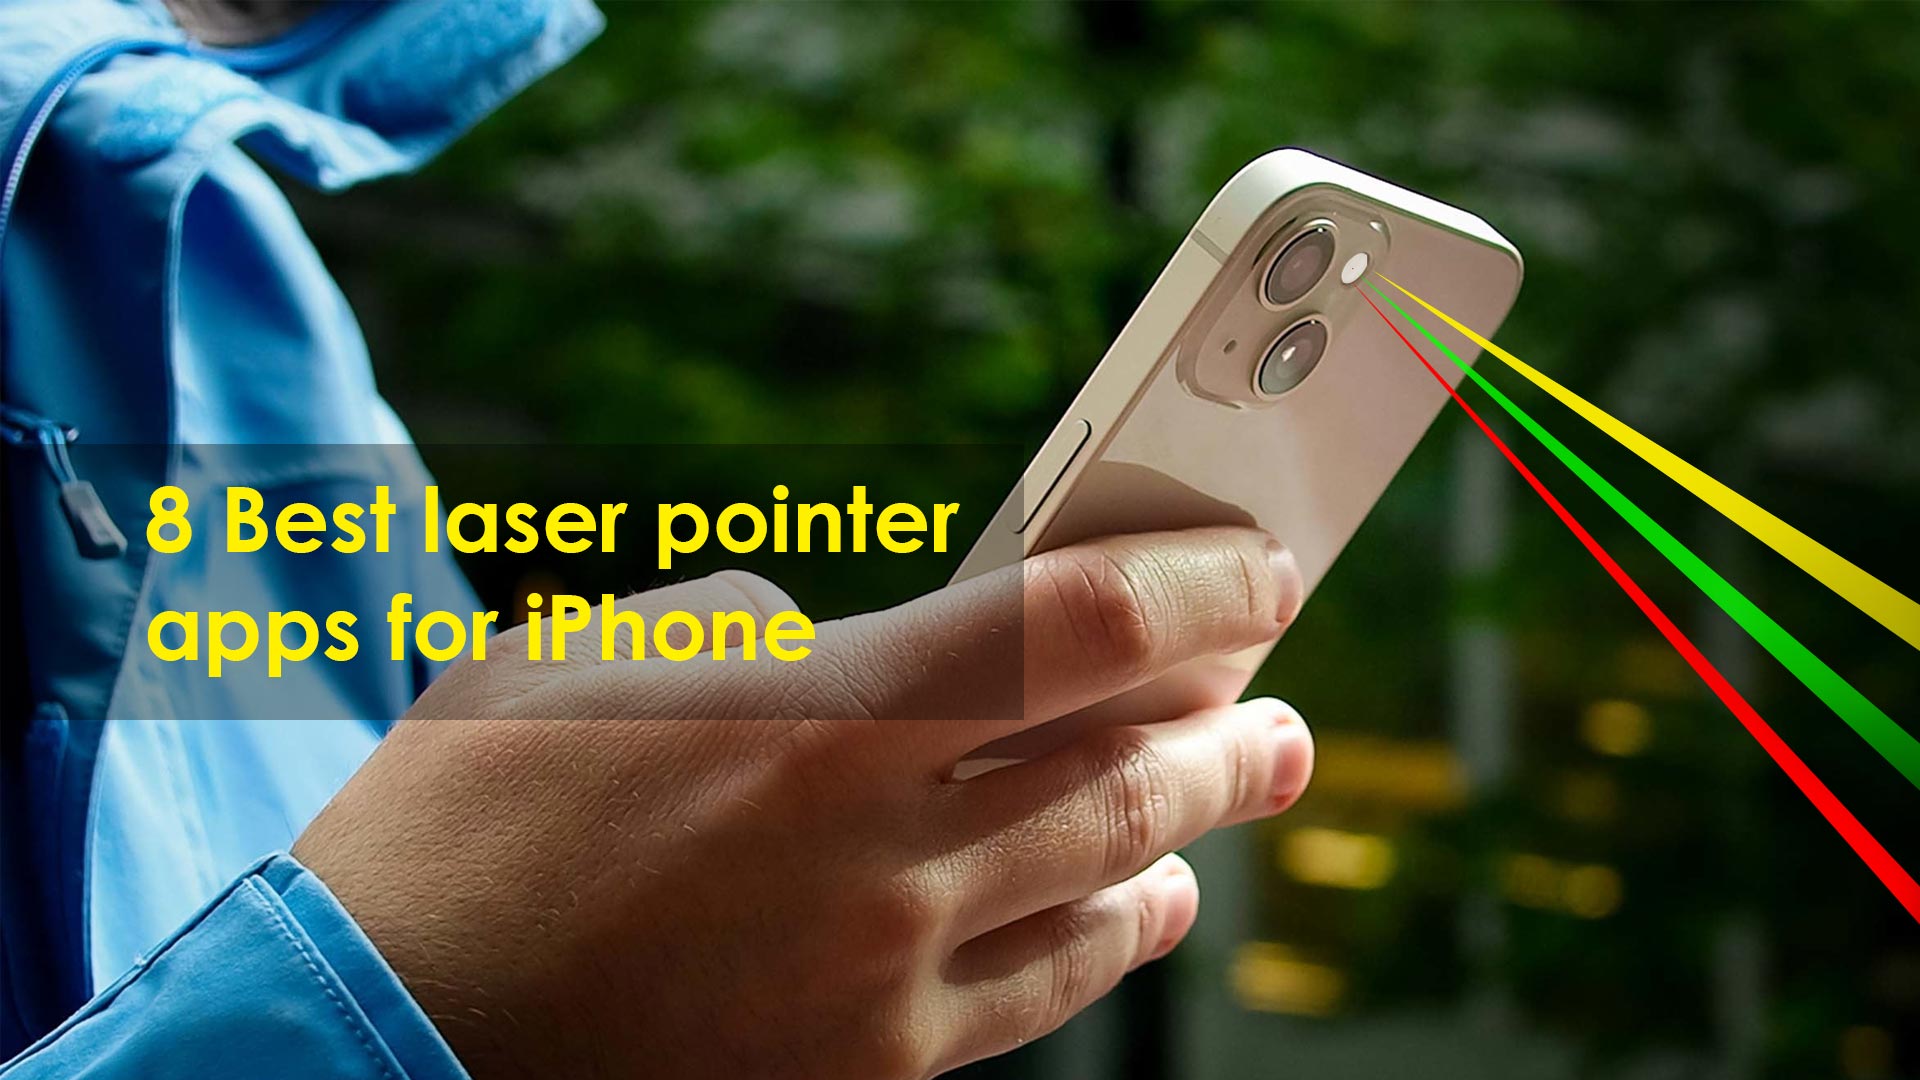 Best laser pointer apps for iPhone